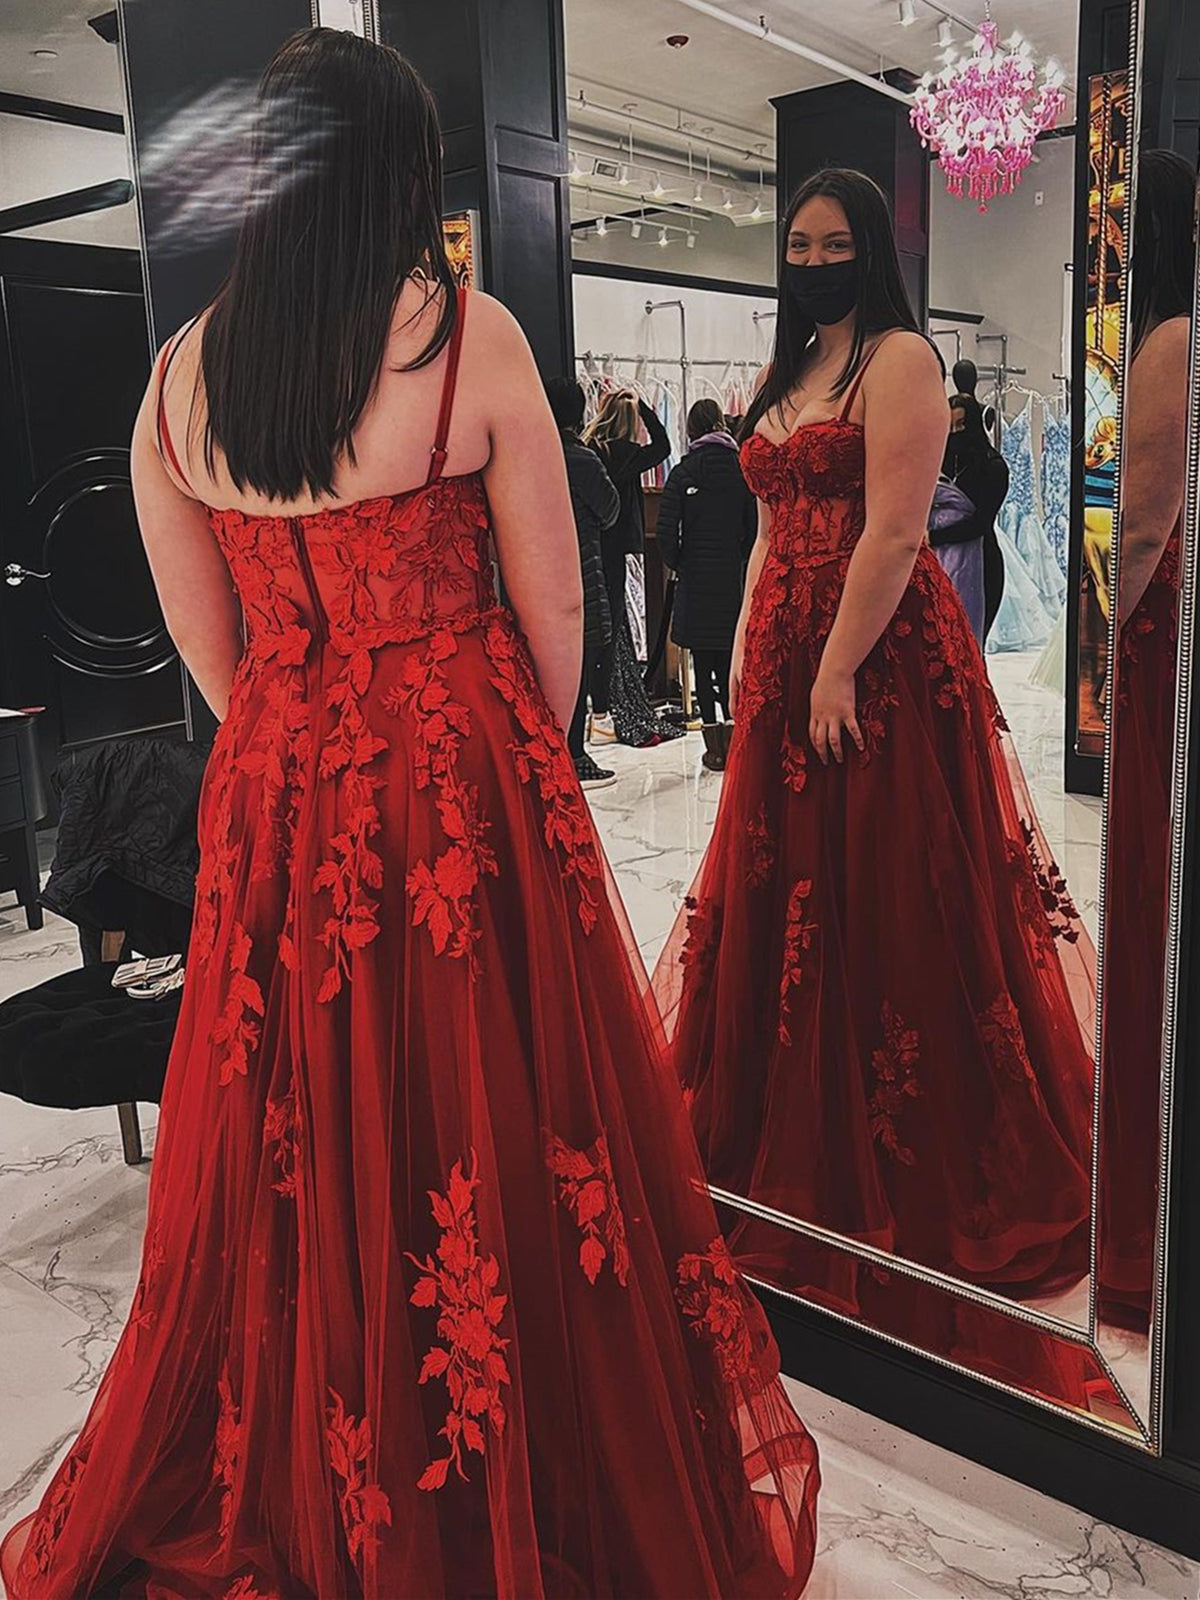 Sweetheart Neck Open Back Wine Red Lace Long Prom Dresses, Burgundy Lace Formal Graduation Evening Dresses with Appliques 